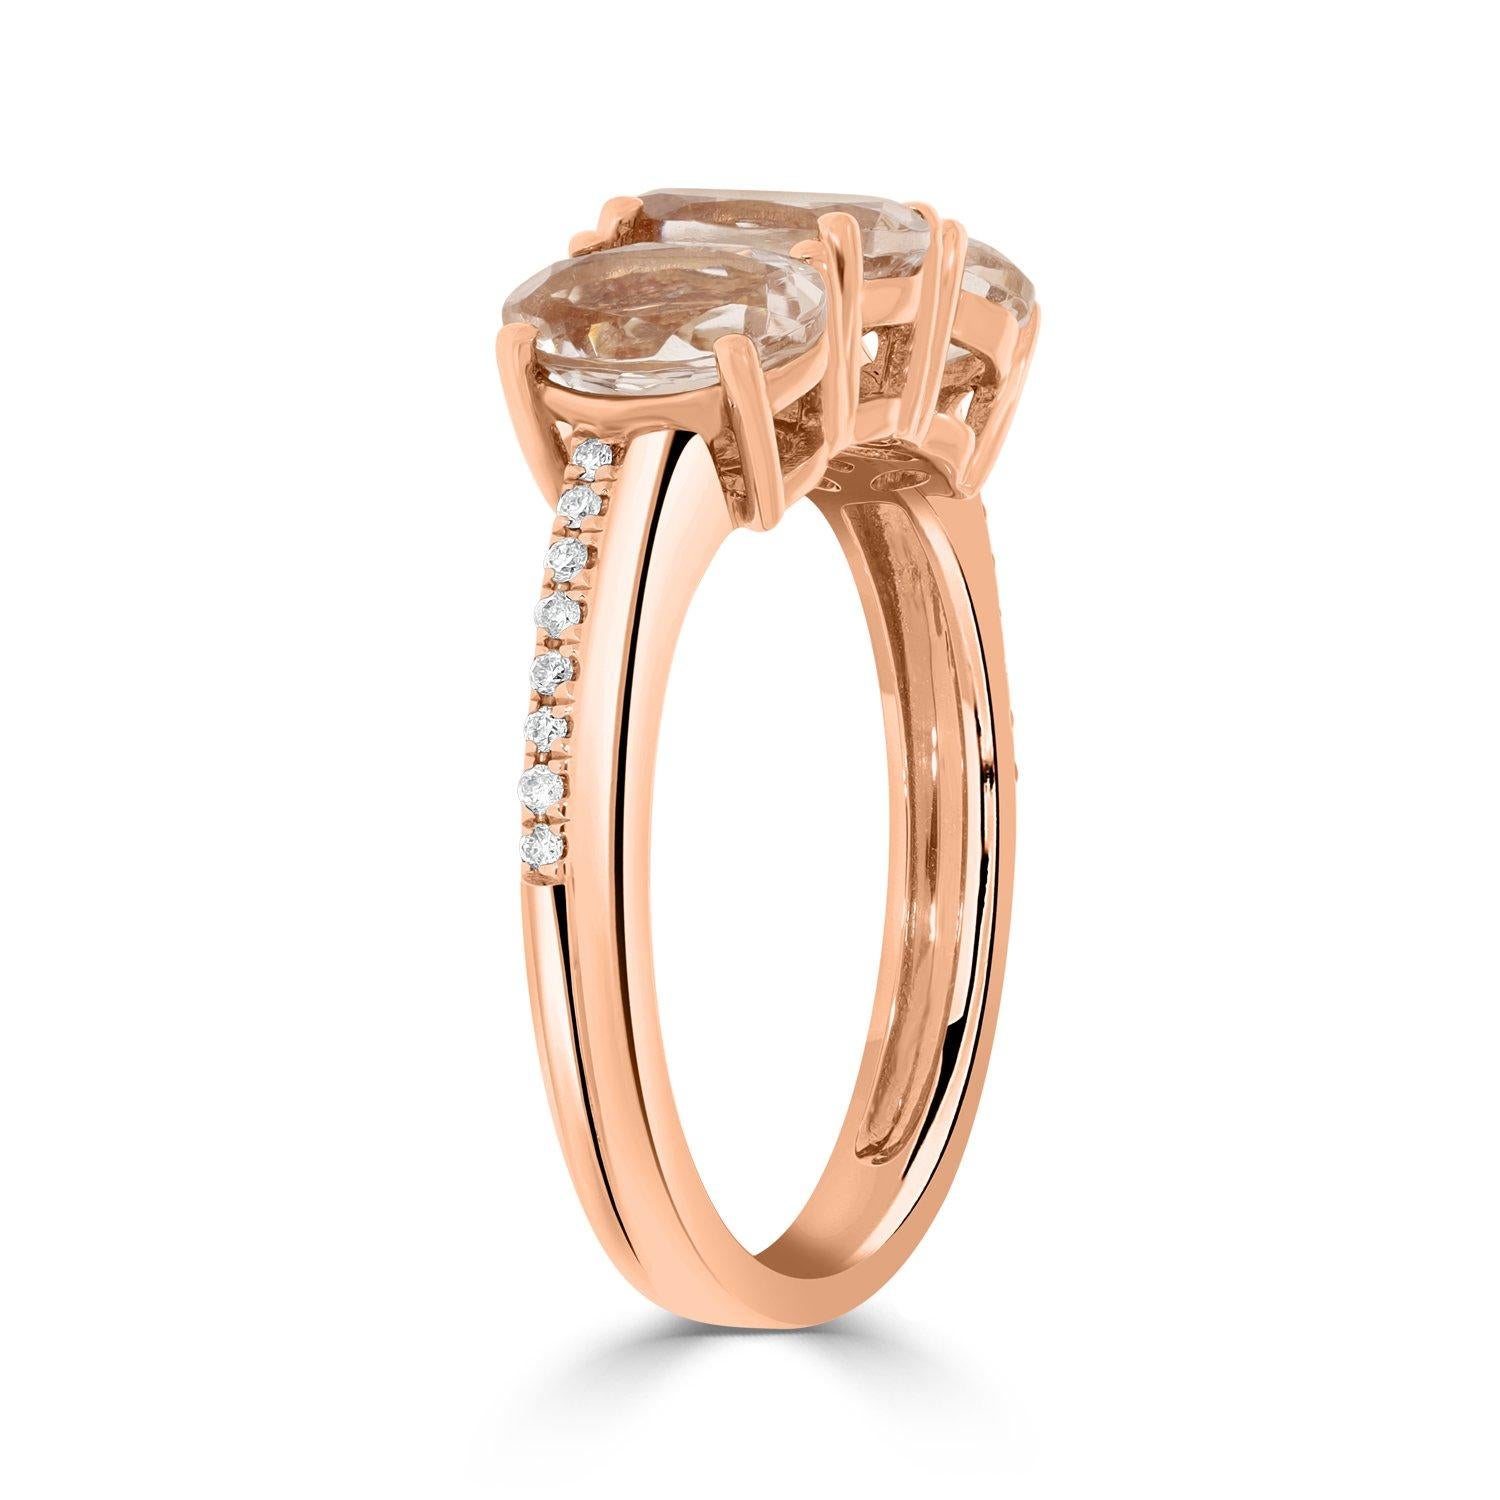 Women's 2.08 Morganite Rings with 0.07tct Diamond Set in 14K Rose Gold For Sale